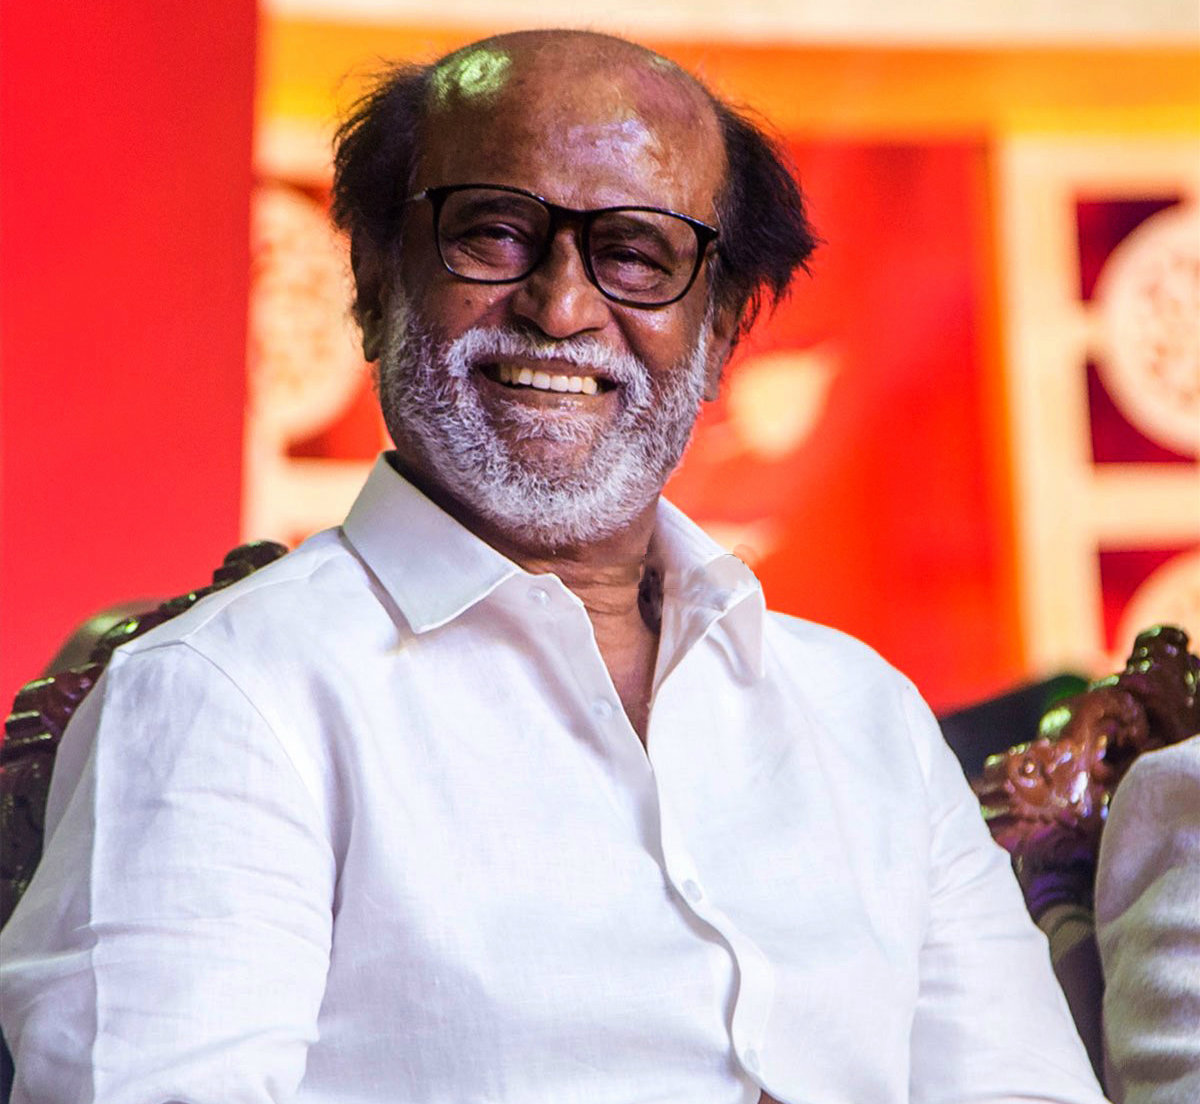 Rajinikanth has announced he will contest from all 234 seats in the next Assembly elections, originally due in 2021. 